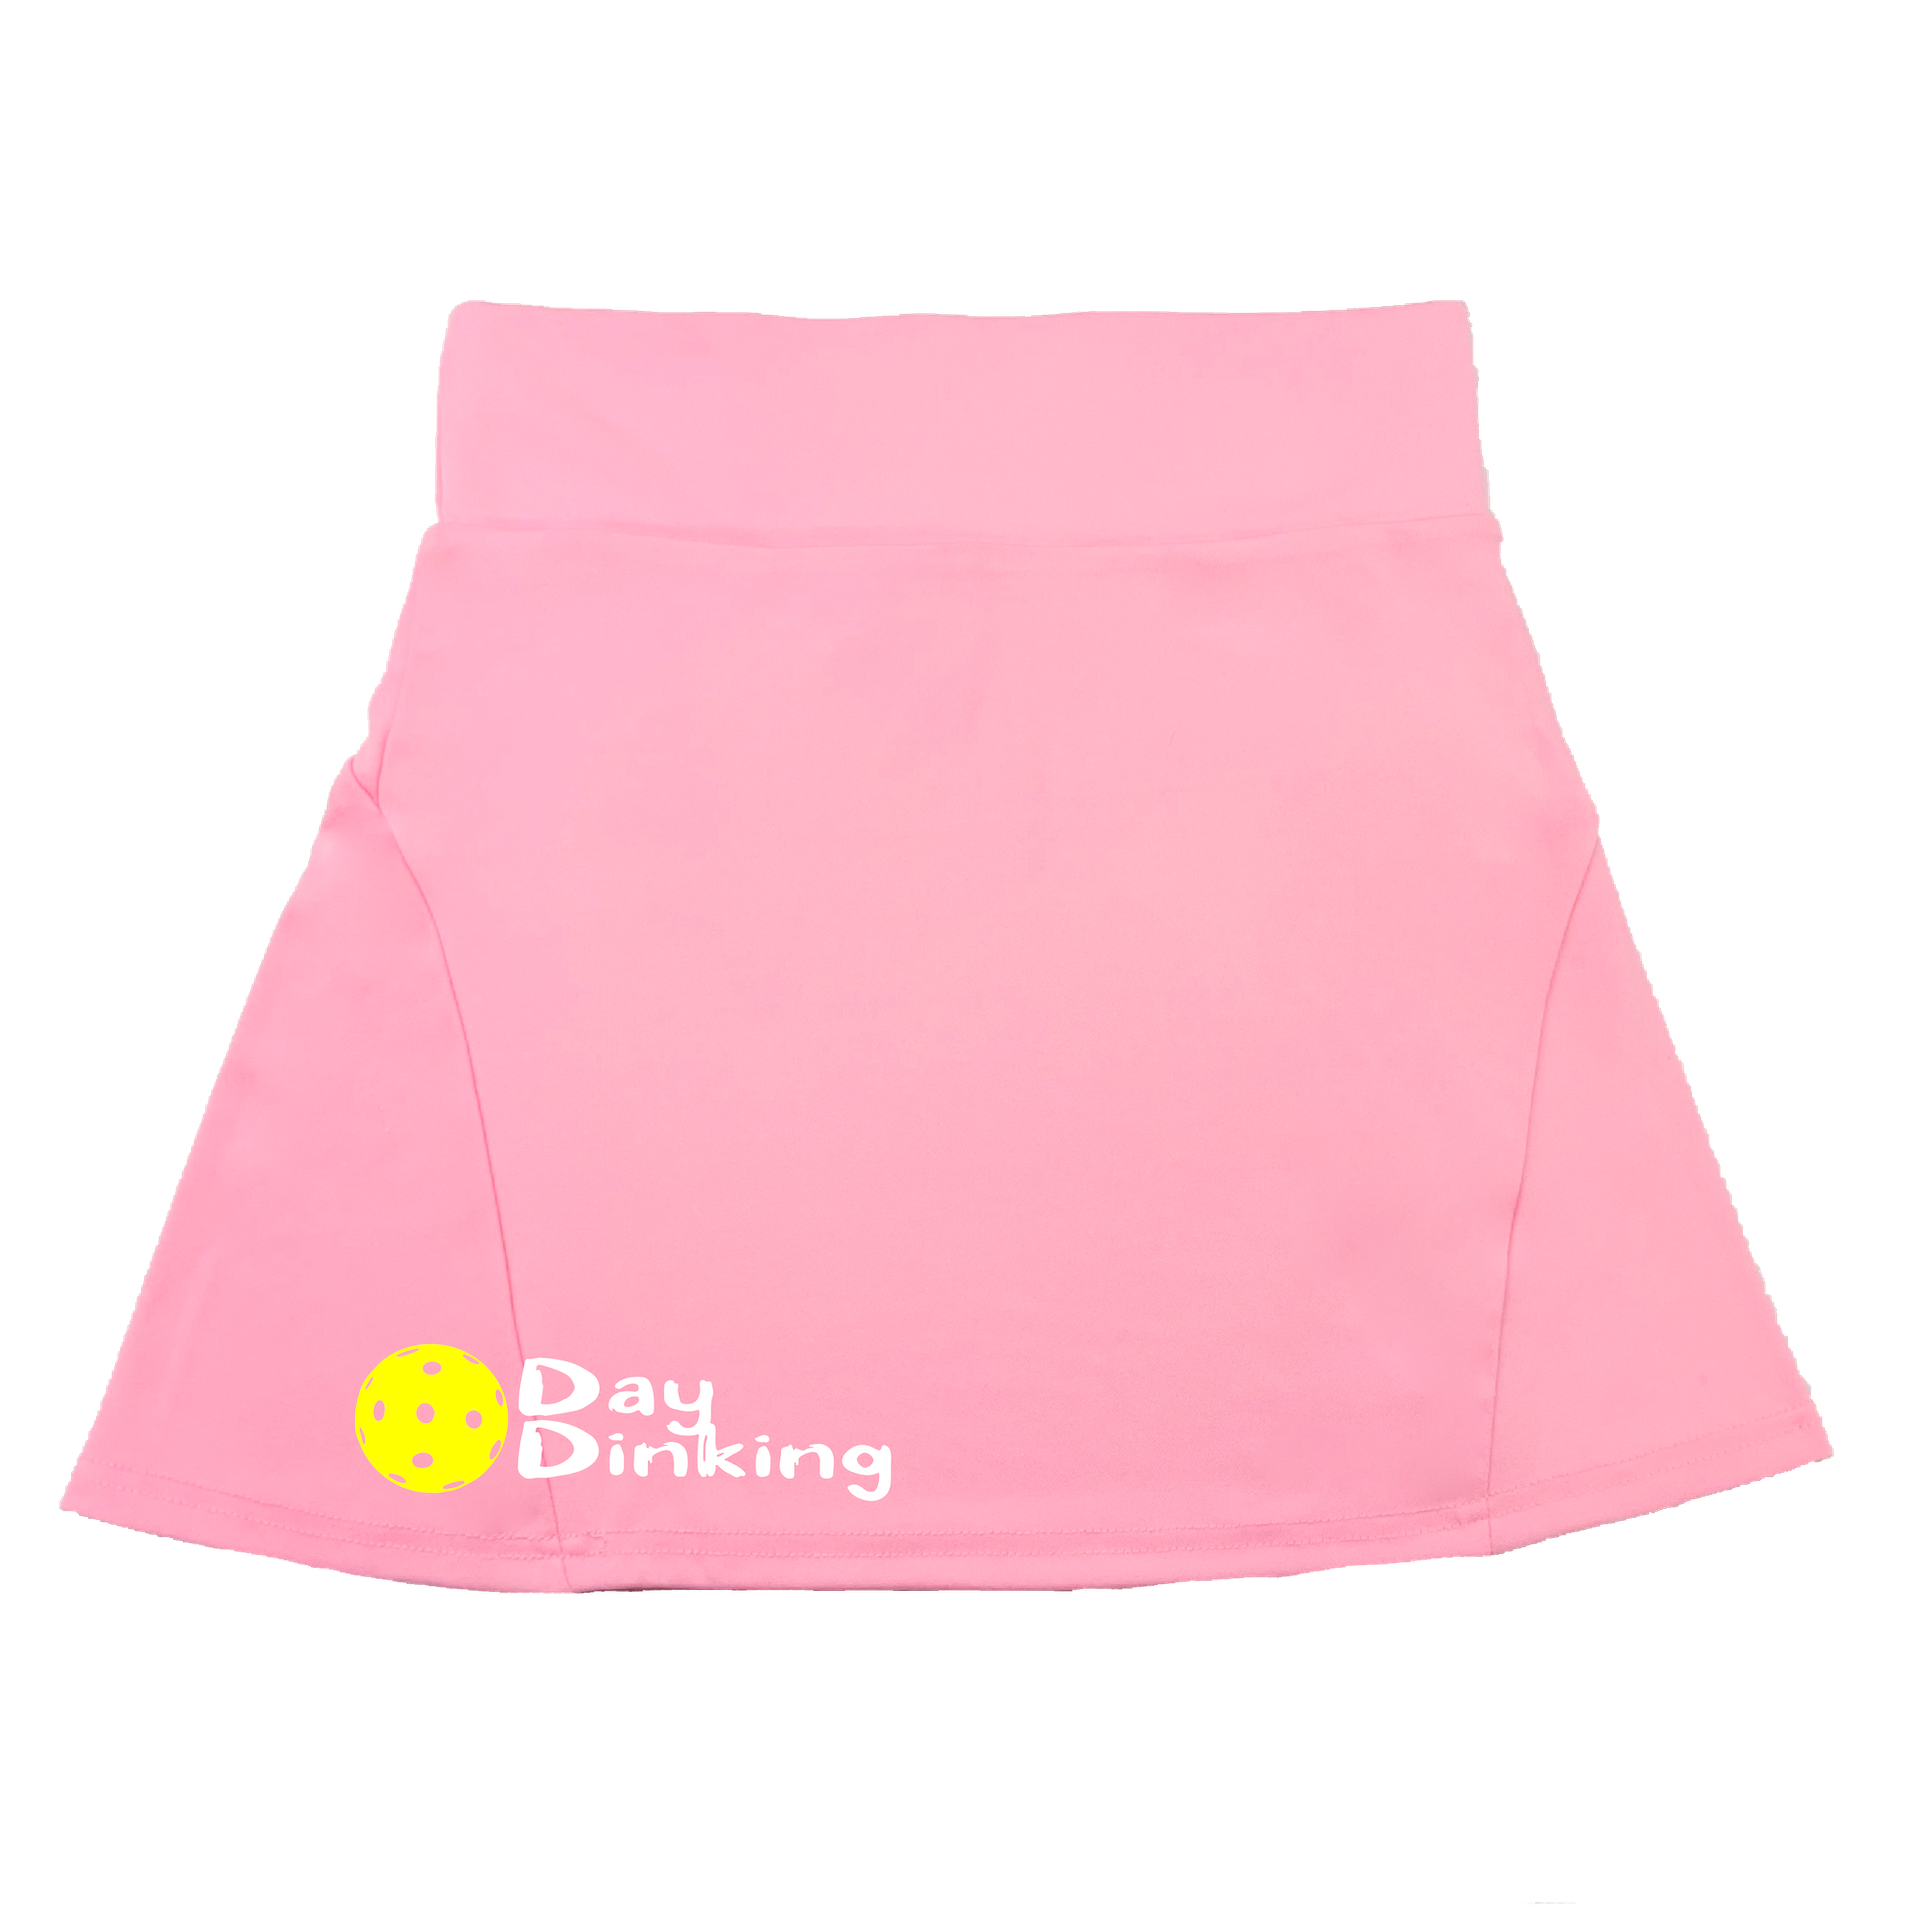 Pickleball Flirty Skort in White, Yellow or Pink.  These flirty skorts have a flat mid-rise waistband with a 3-inch waistband.  Light weight without being see through and the material wicks away moisture quickly.  Flirty pleats in the back with inner shorts for free movement and stylish coverage on the courts.  A functional zipper pocket on the back and two built in pockets on the shorts for convenient storage. The rear pleats are what make these skorts fabulous!  